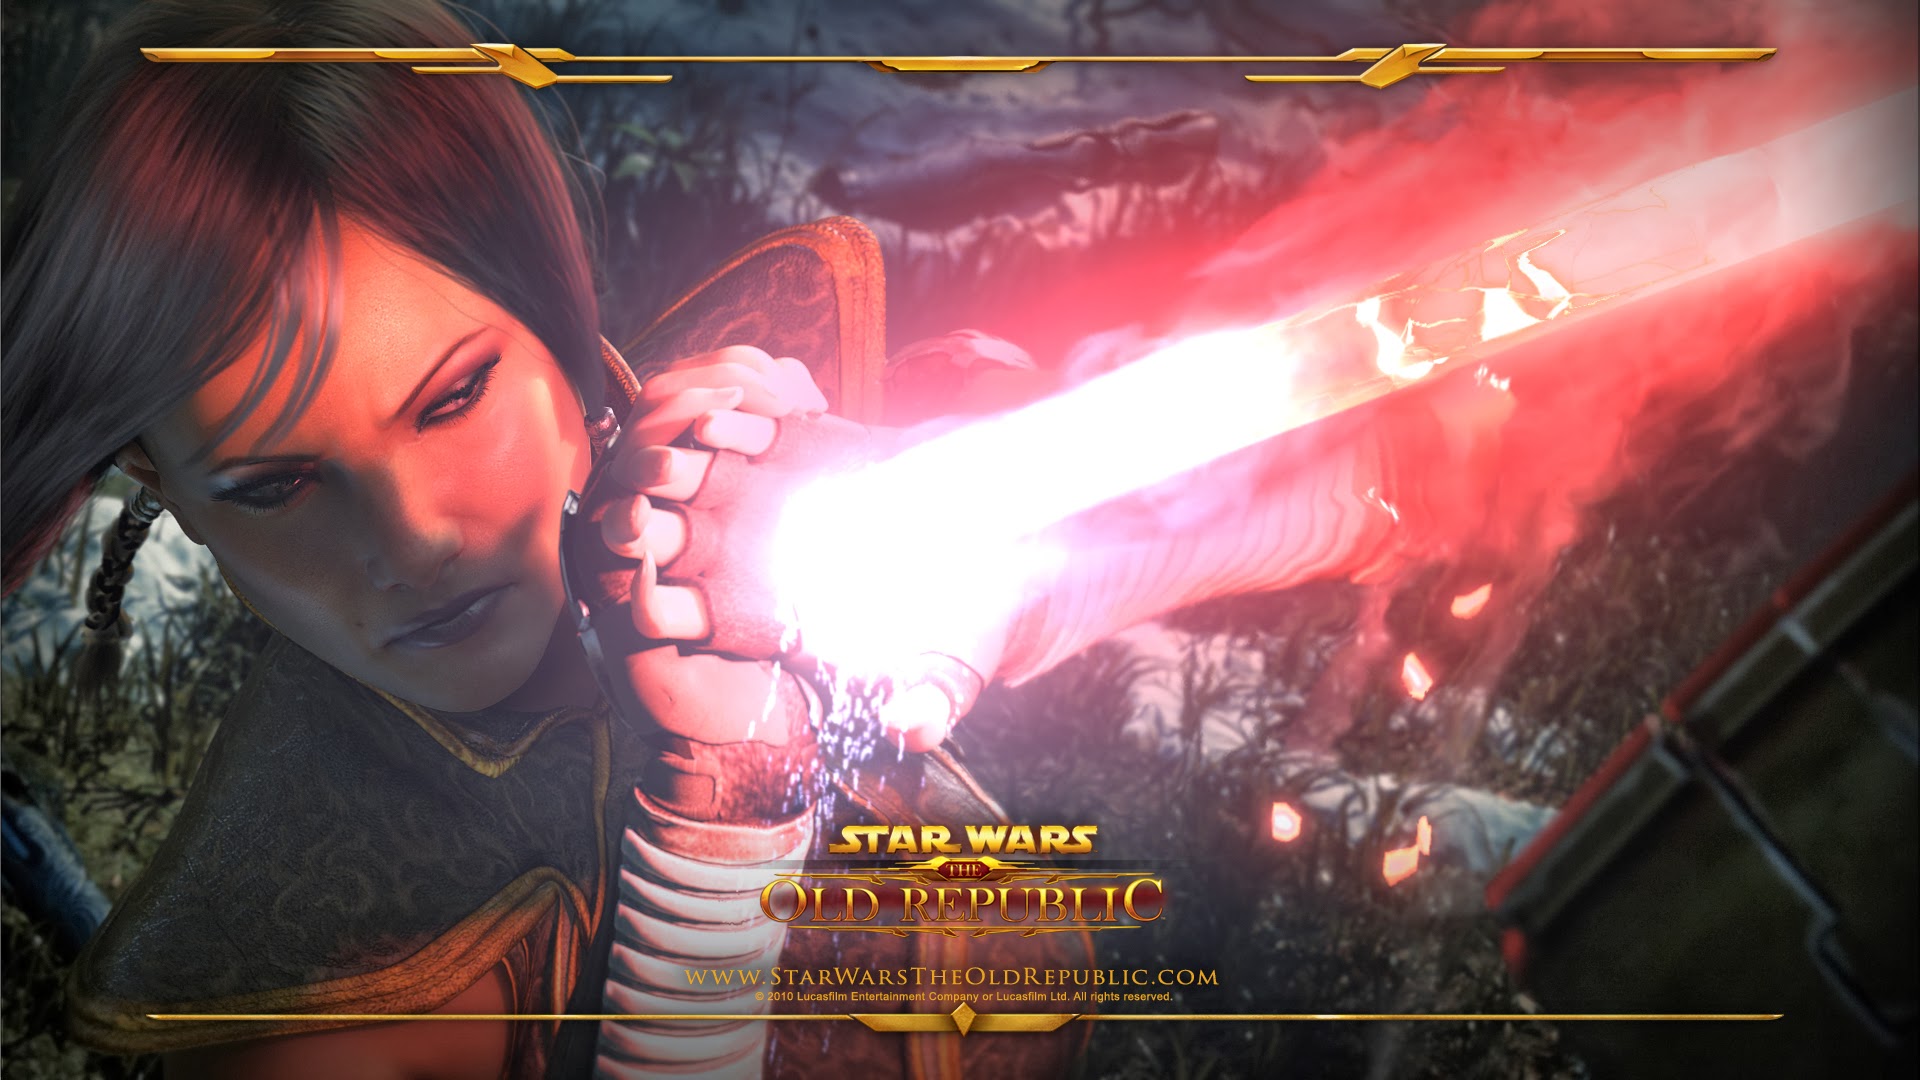 Star Wars The Old Republic Girl Lock Laser Shot Full Hd Wallpapers Images, Photos, Reviews